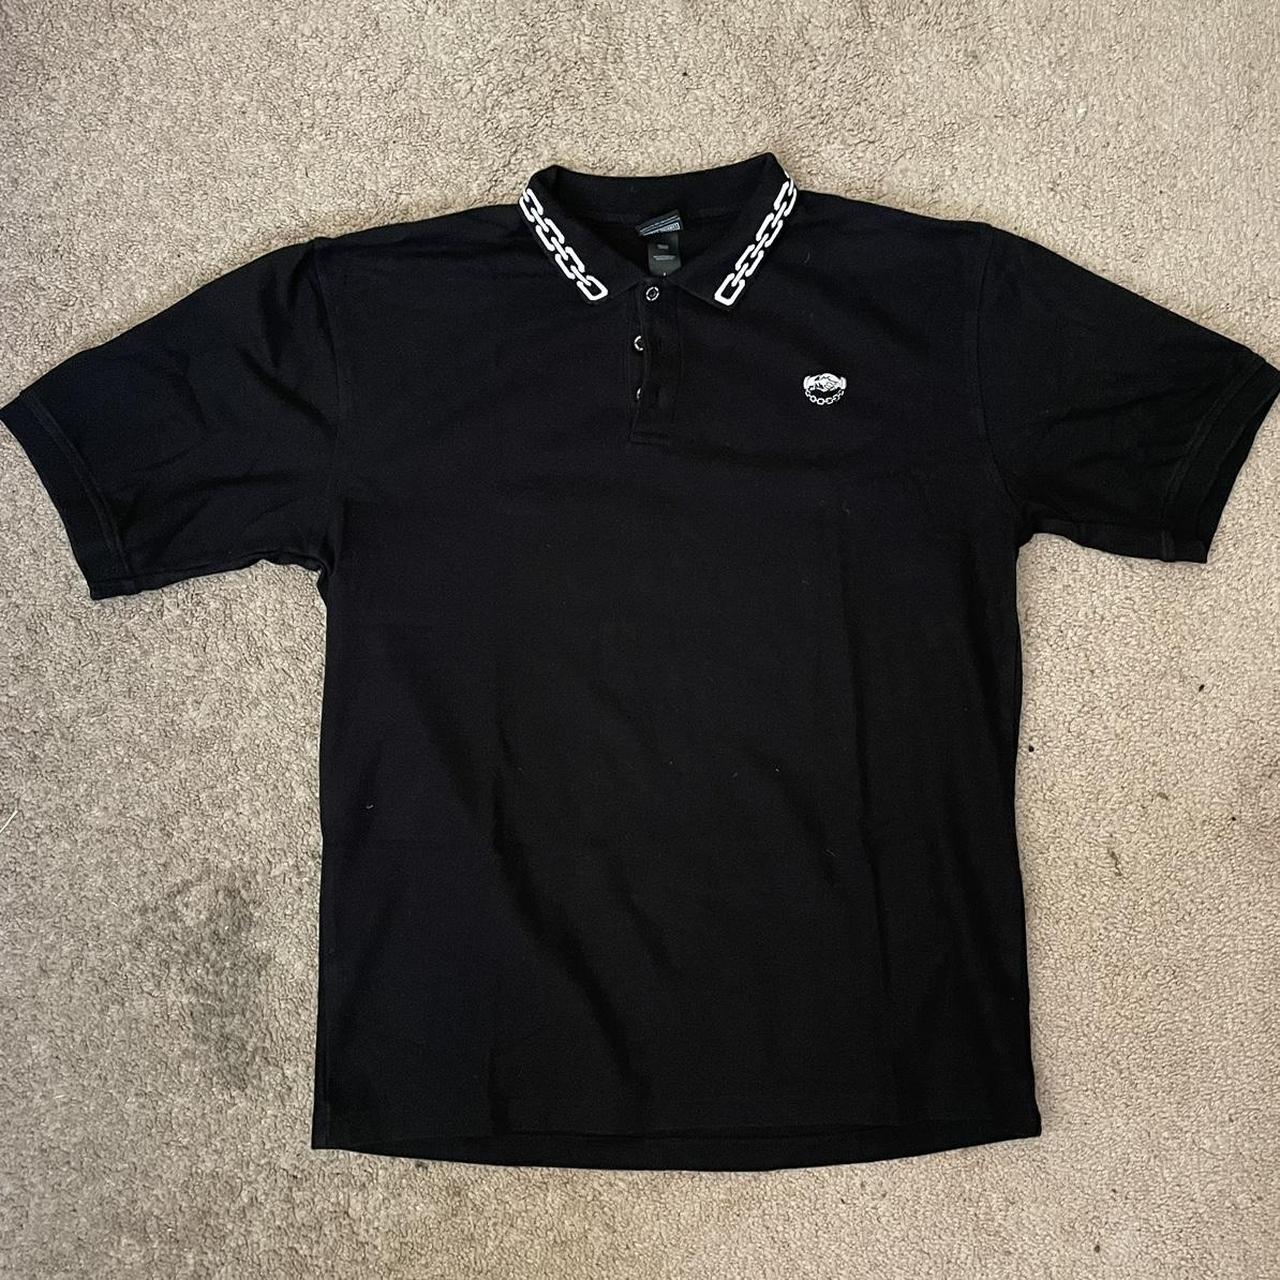 Black and white Lurking Class Sketchy Tank polo... - Depop